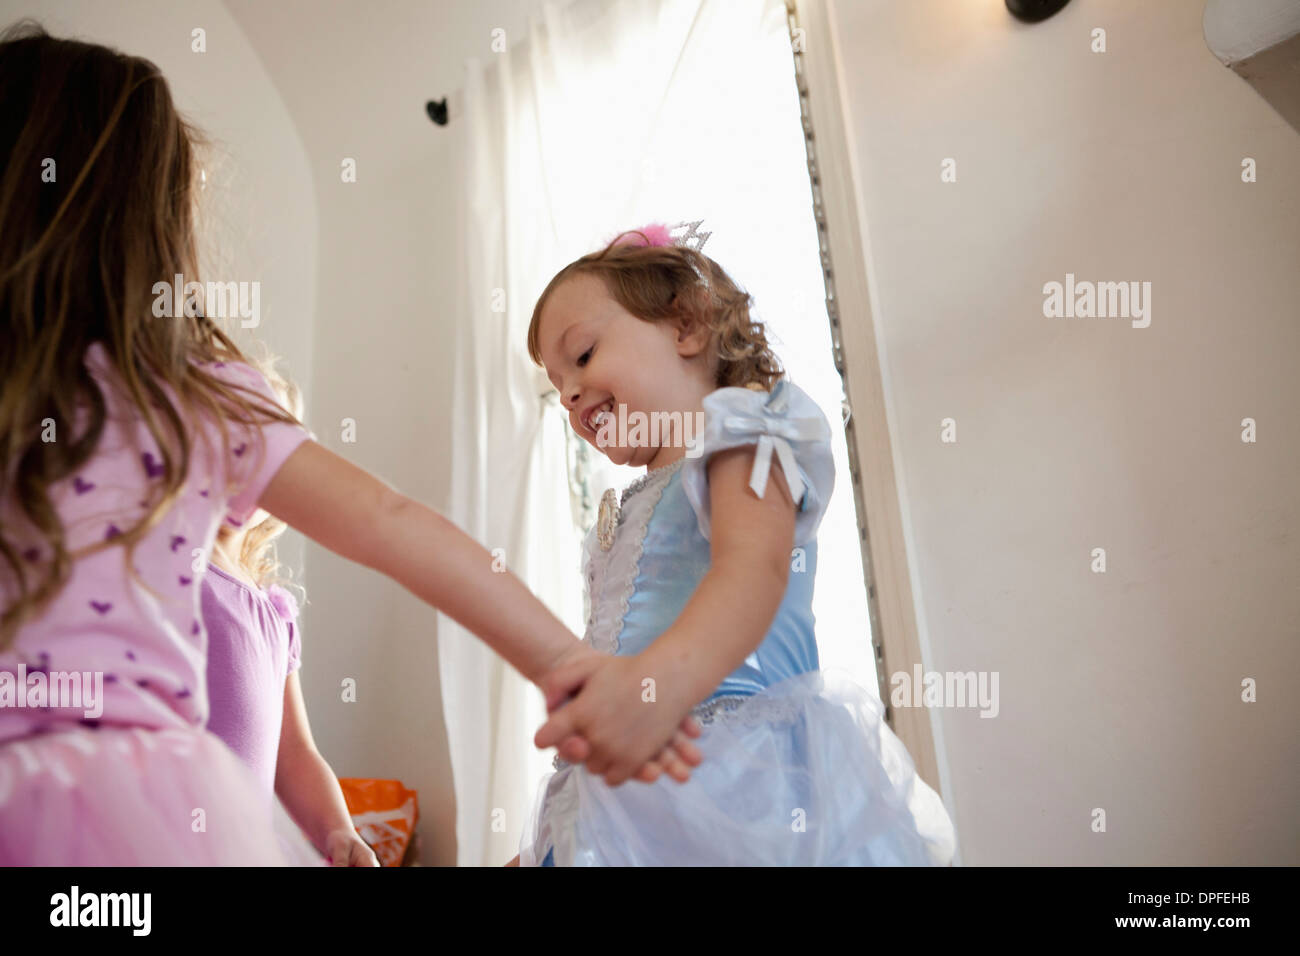 Three young girls in party dress dancing in circle Stock Photo